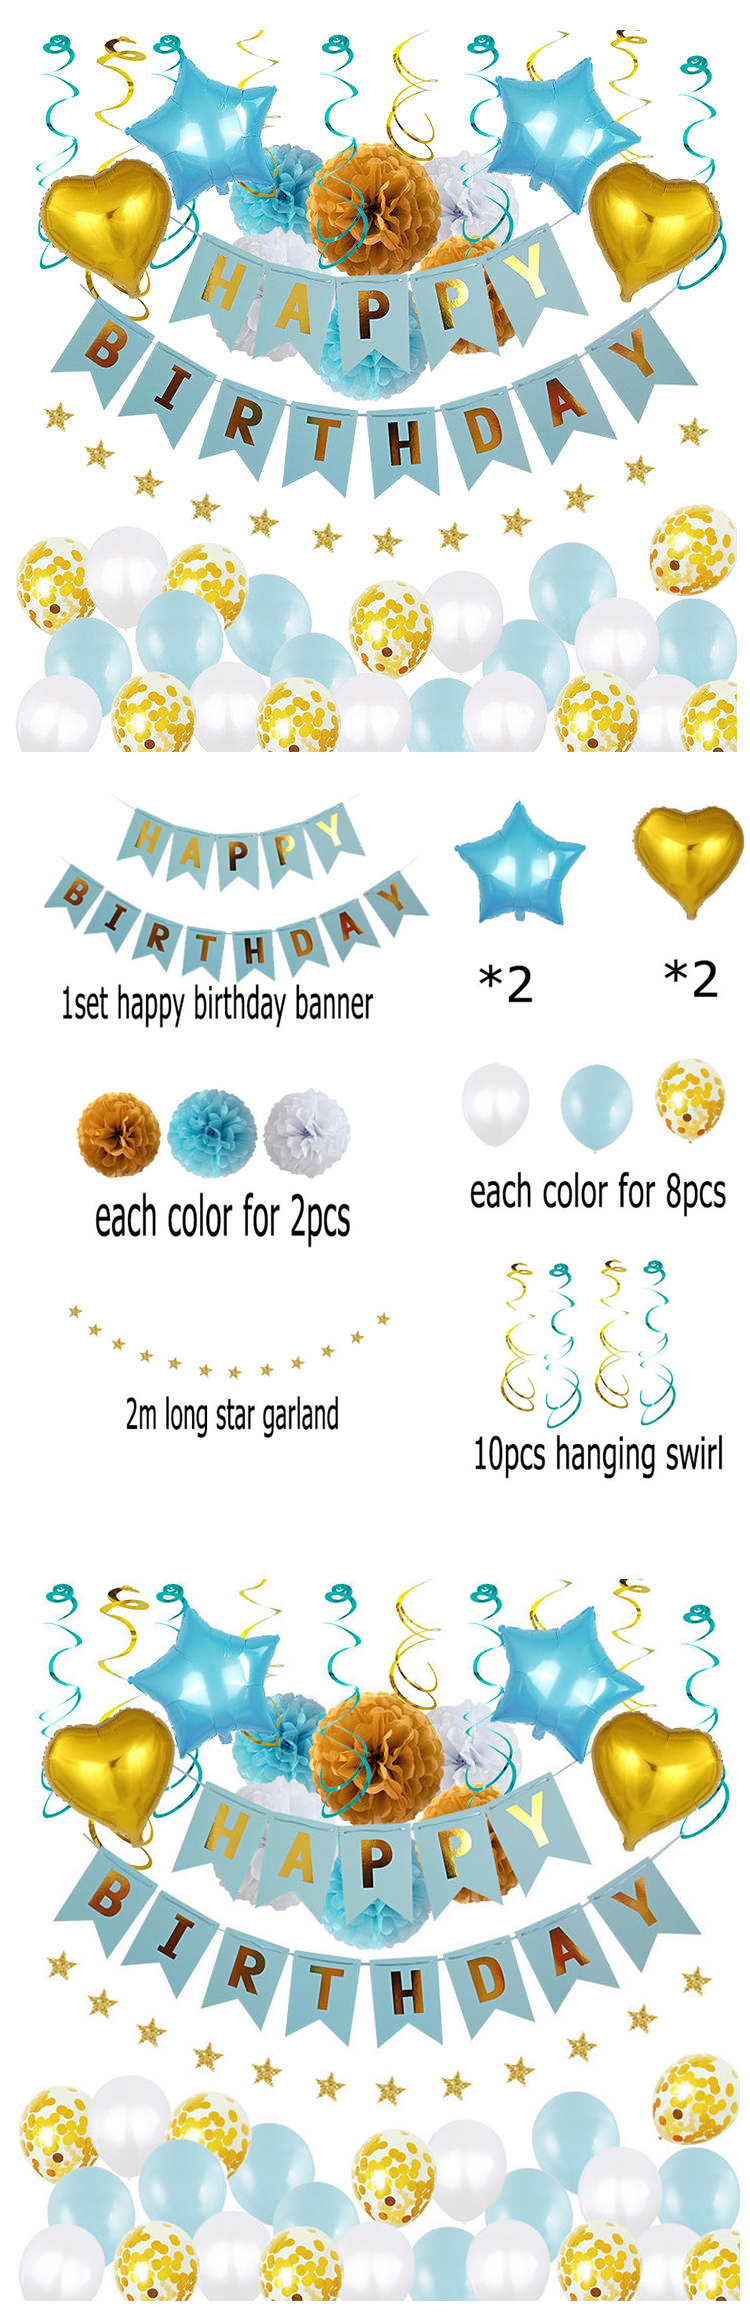 PAFU Blue And Gold Birthday Party Supplies Happy Birthday Banner Star Garland Confetti Balloons Birthday Party Decoratio